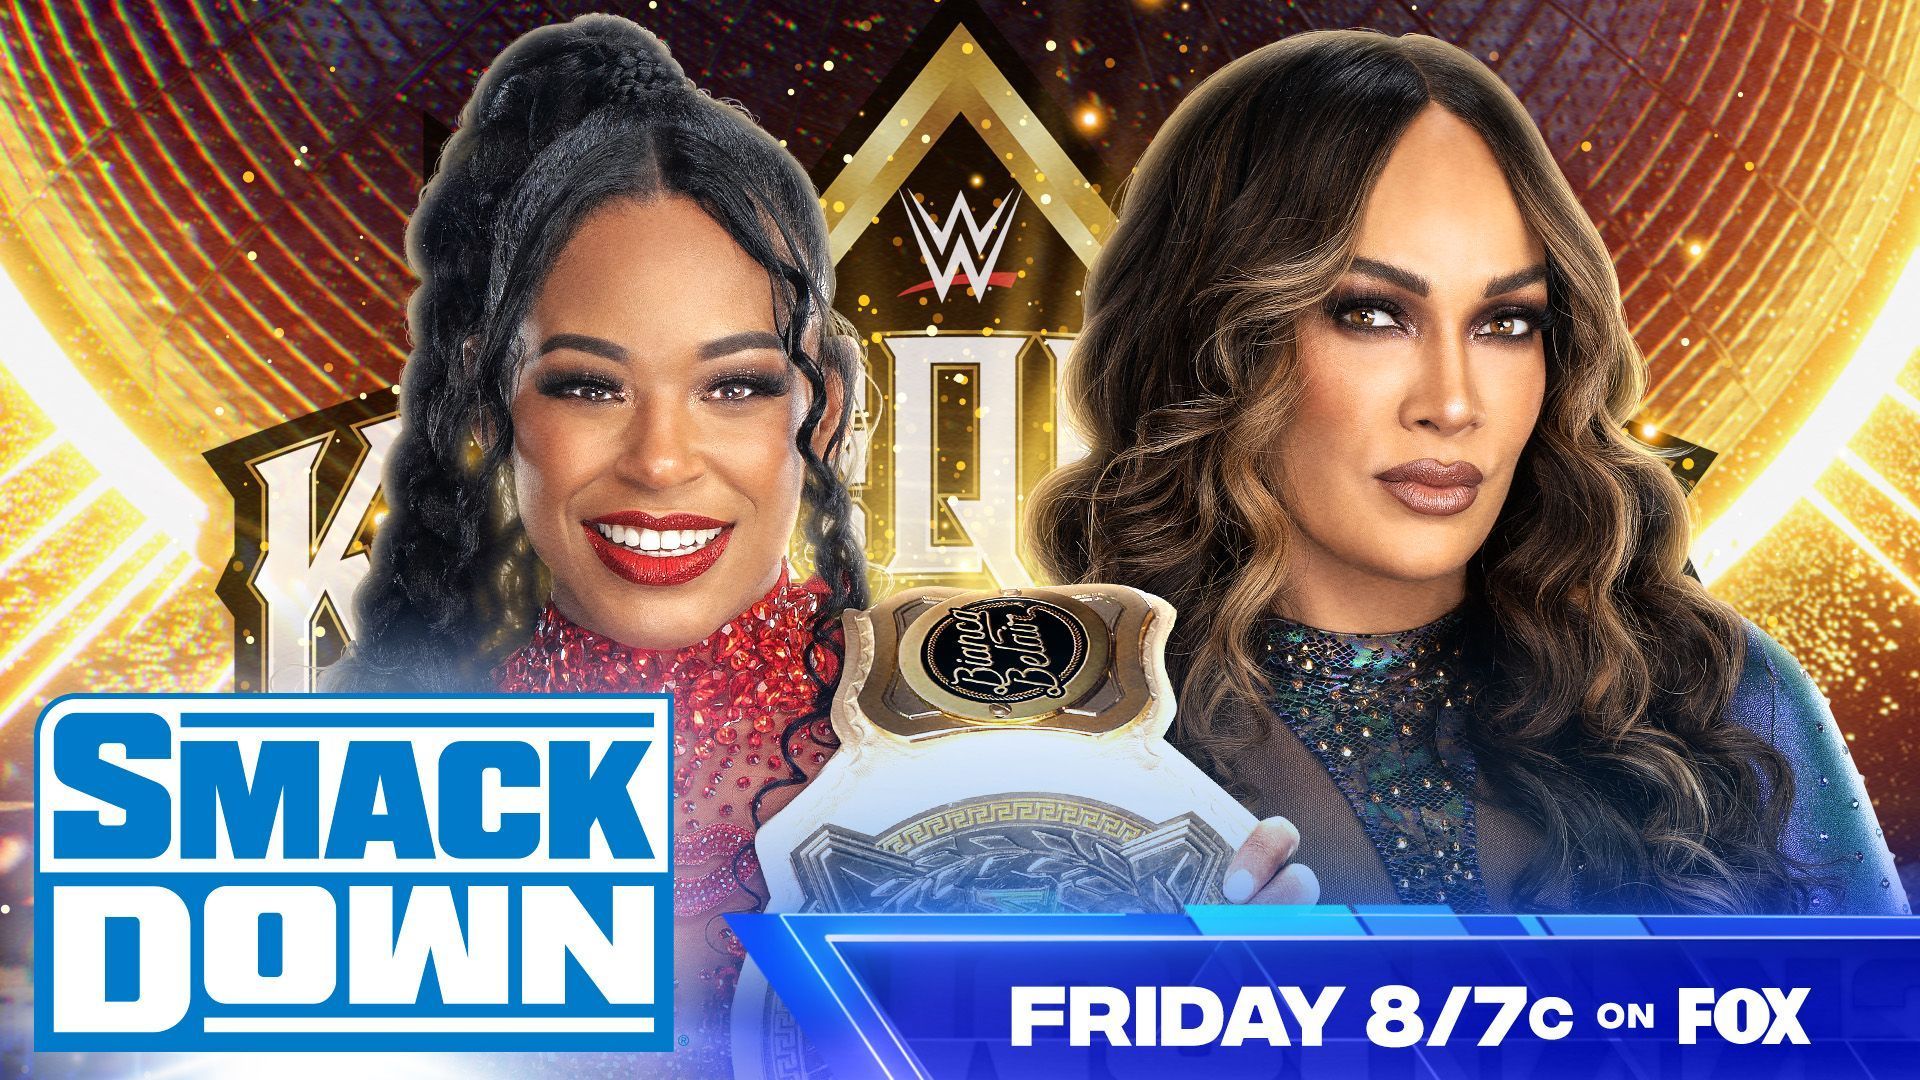 Nia Jax and Bianca Belair will clash on WWE SmackDown